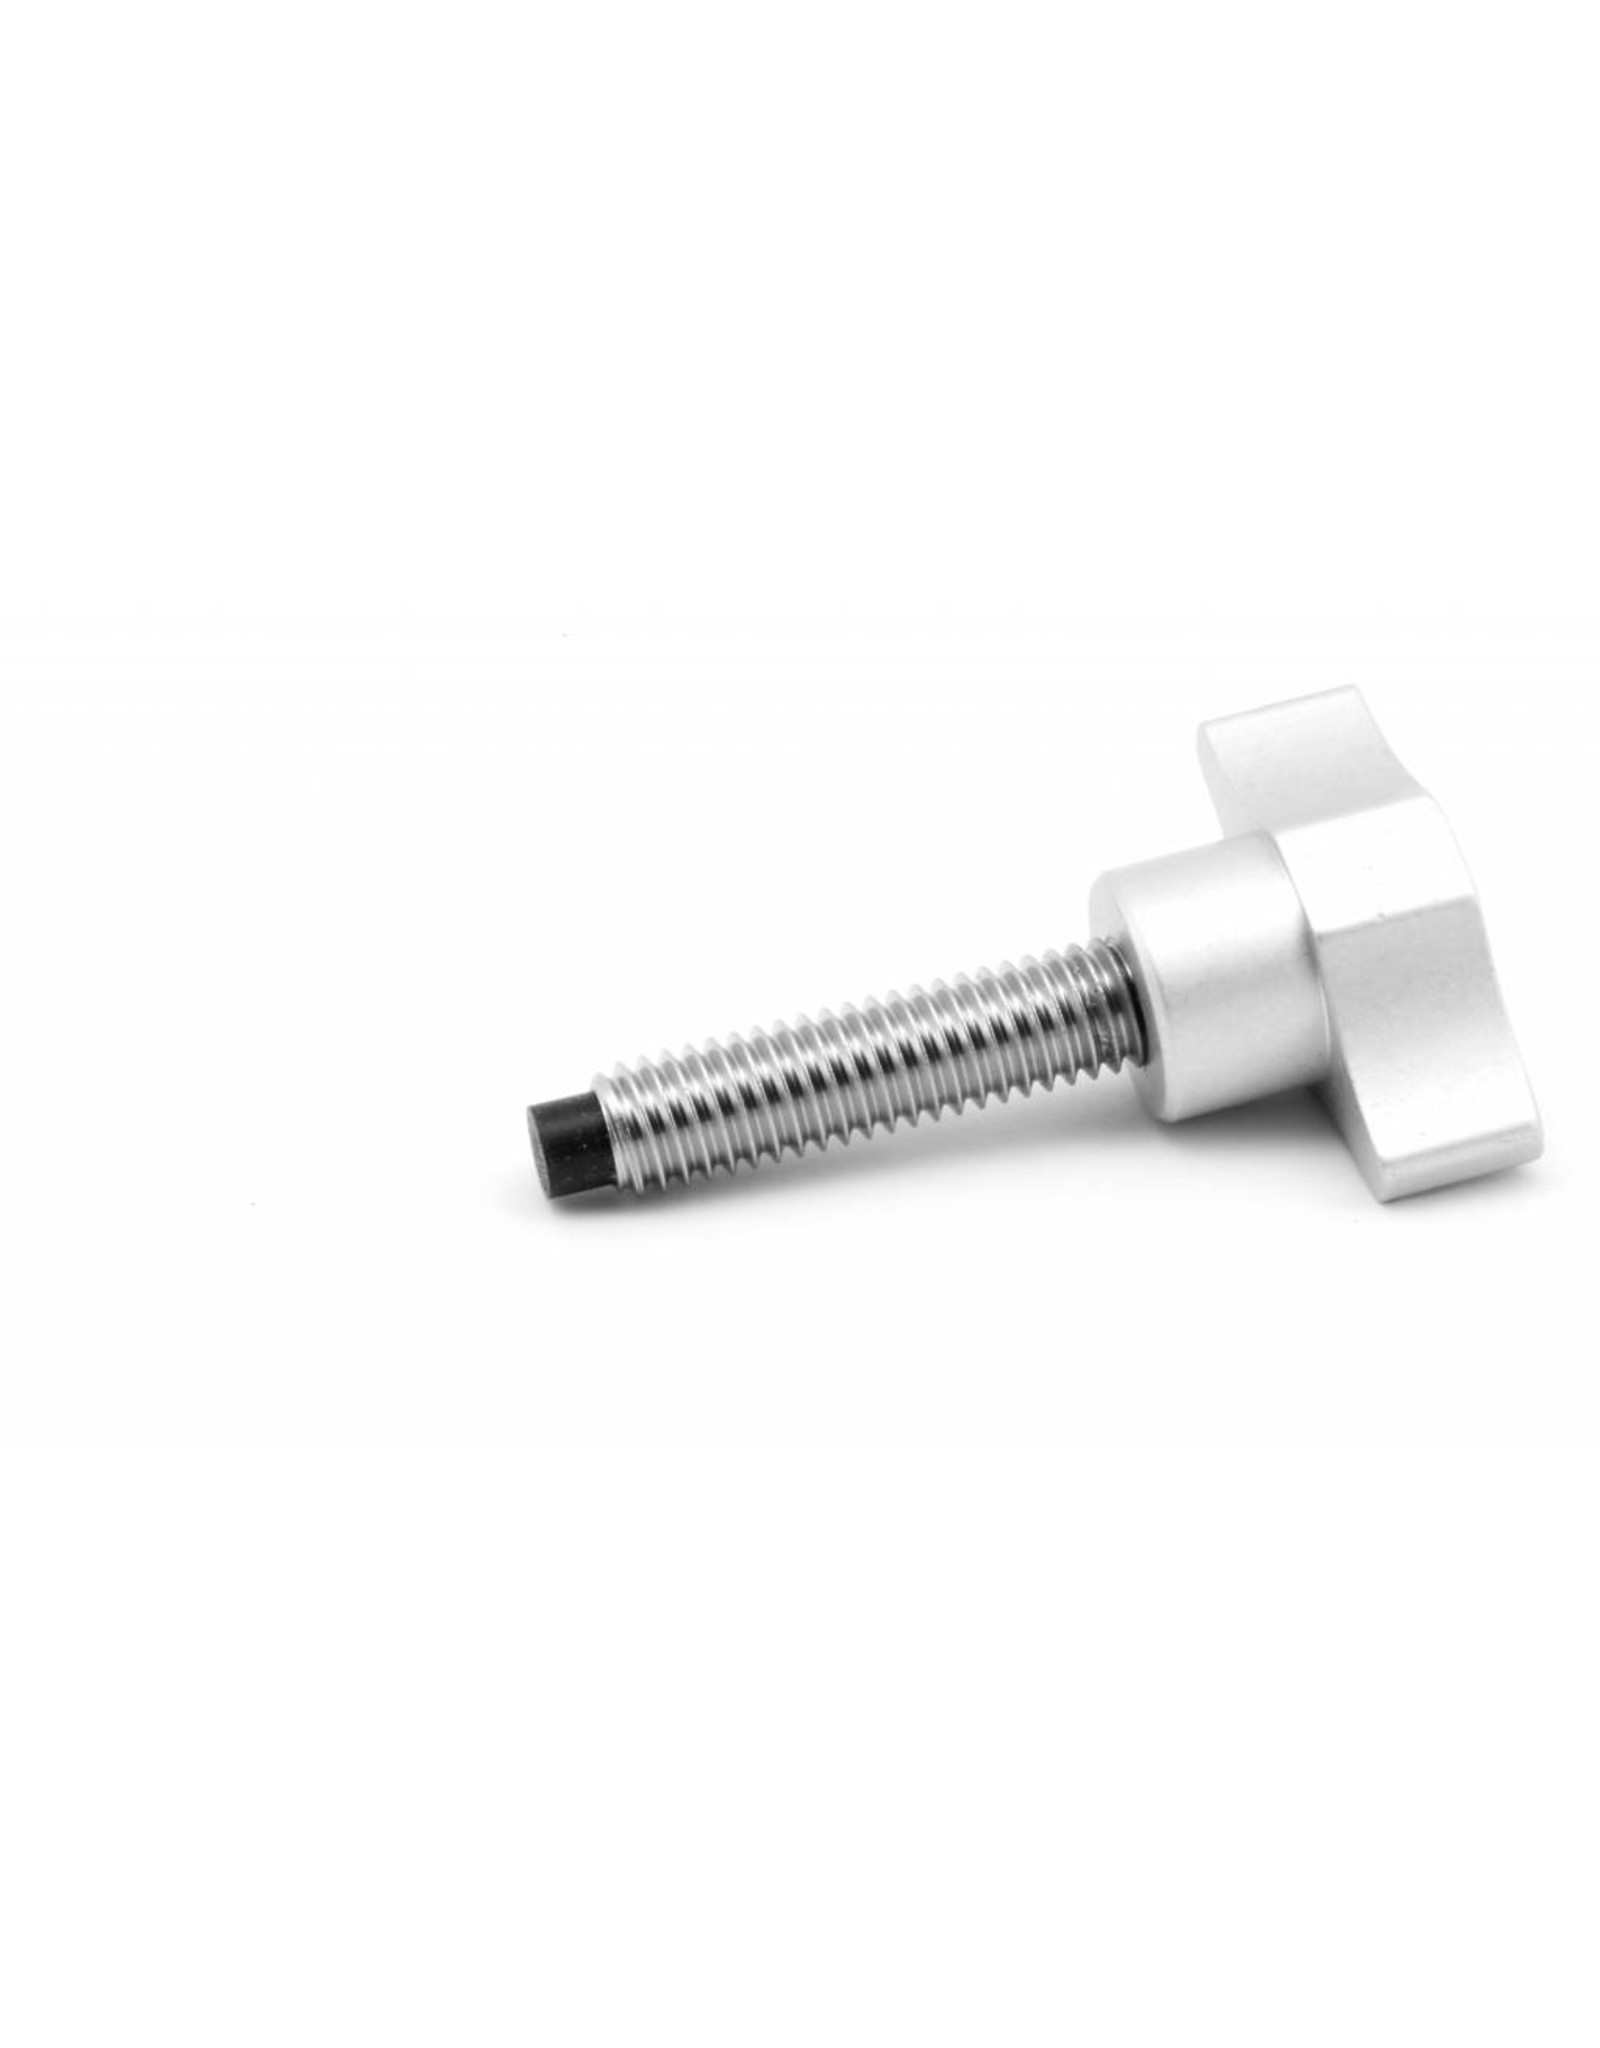 Losmandy Losmandy Counterweight Thumb Screw with Aluminum Knob for 7LB Weight (Includes Small Order Handling Fee of $20)